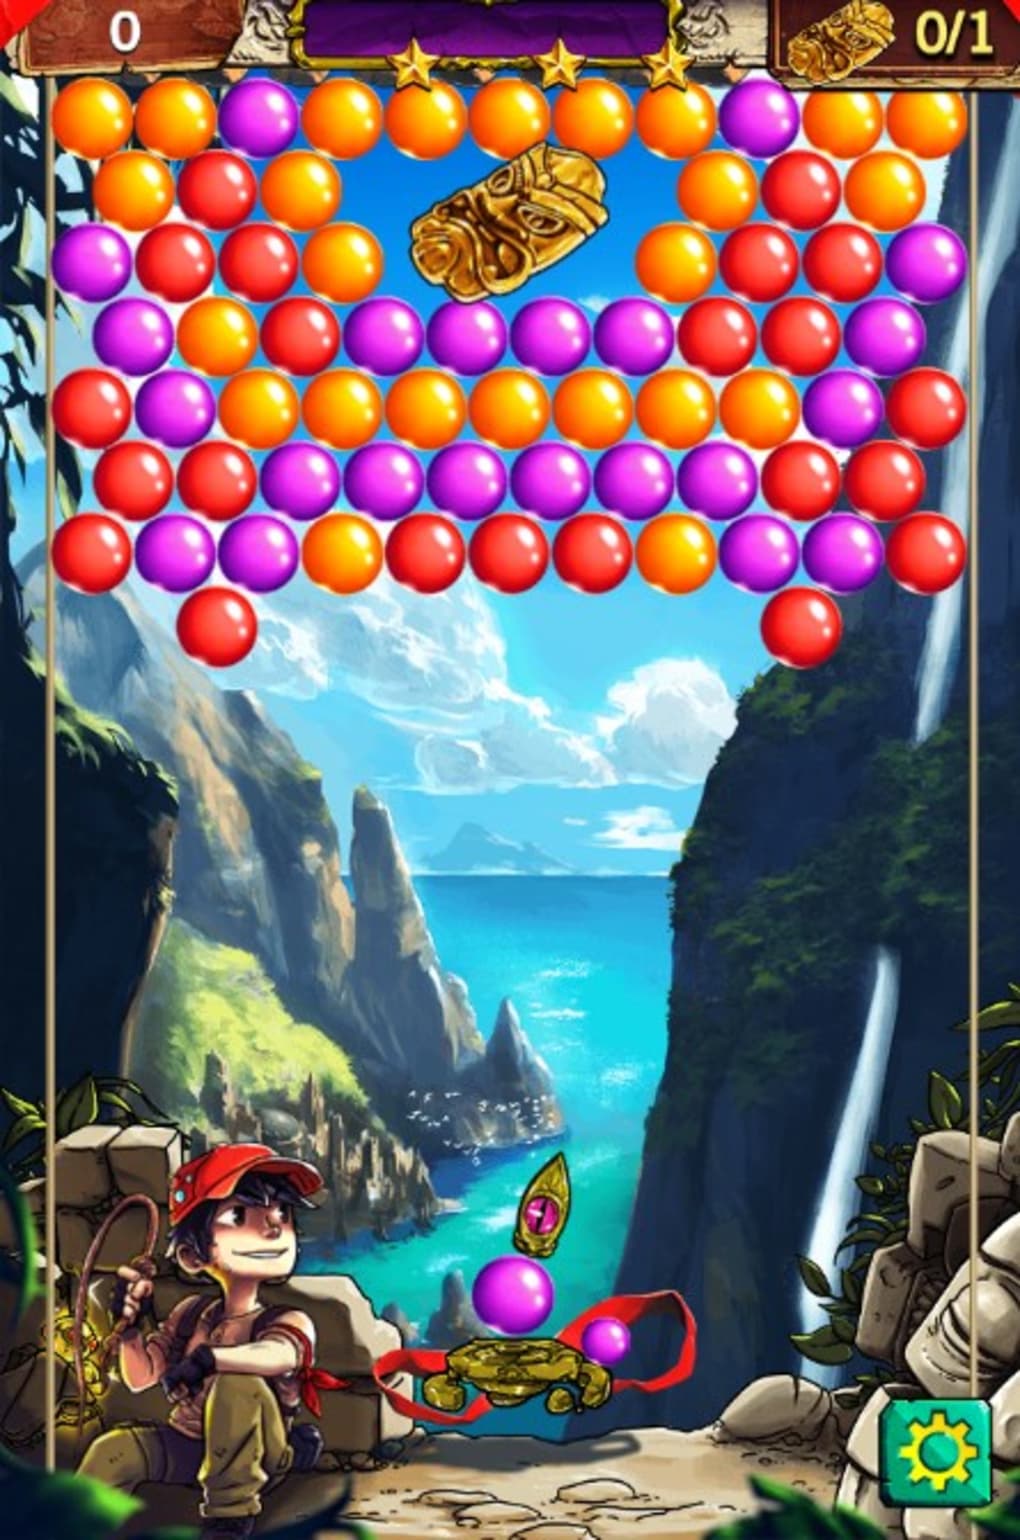 bubble shooter pop for ios